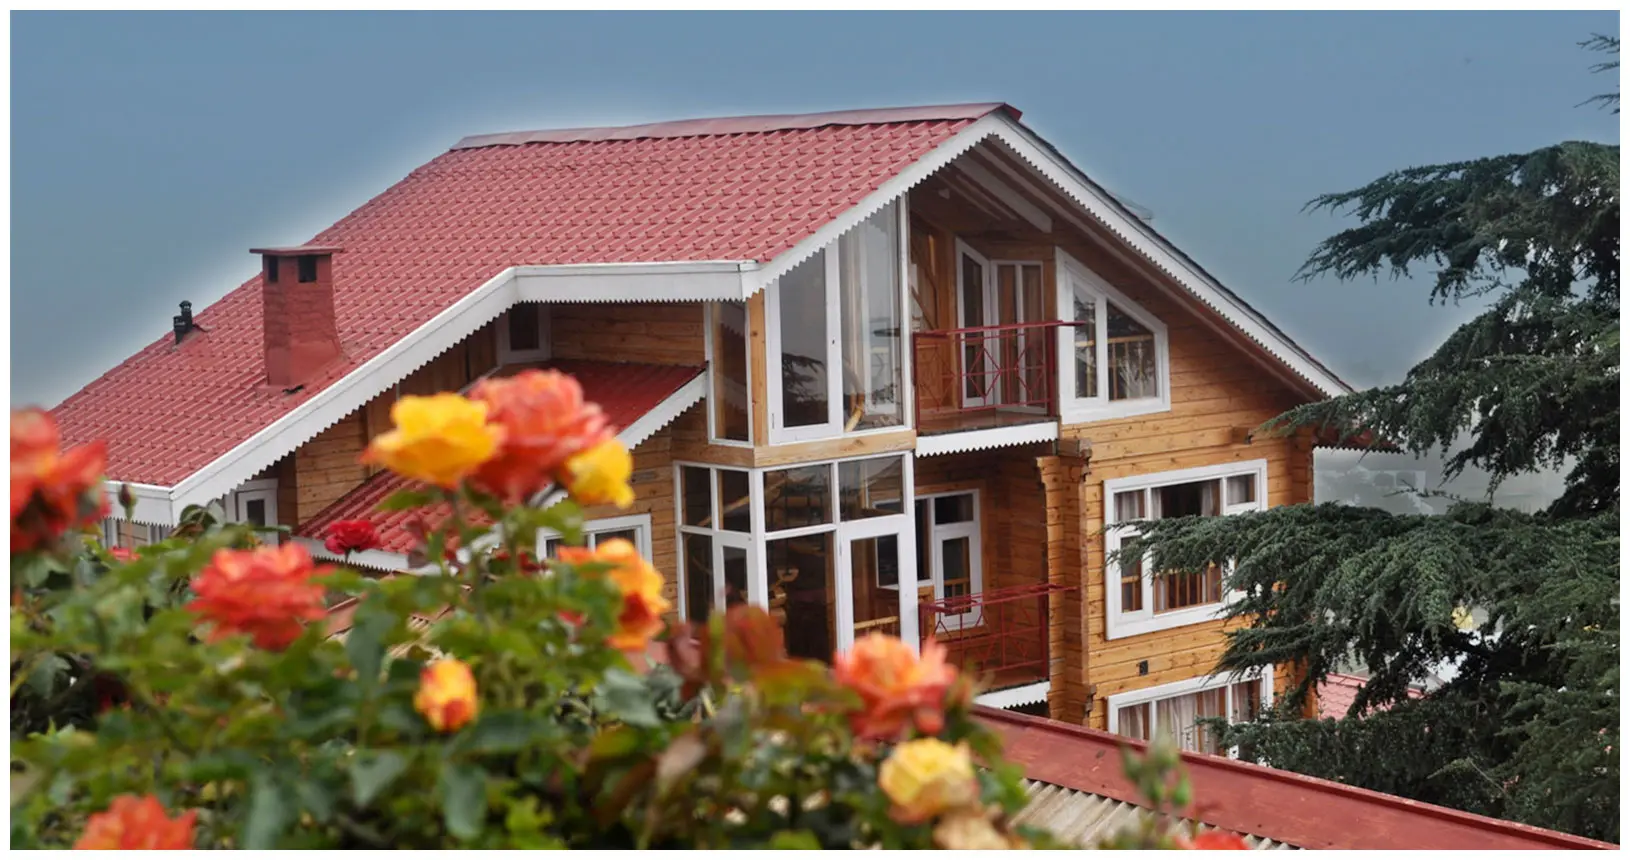 Work from home at our fully serviced Workation Apartments in Shimla